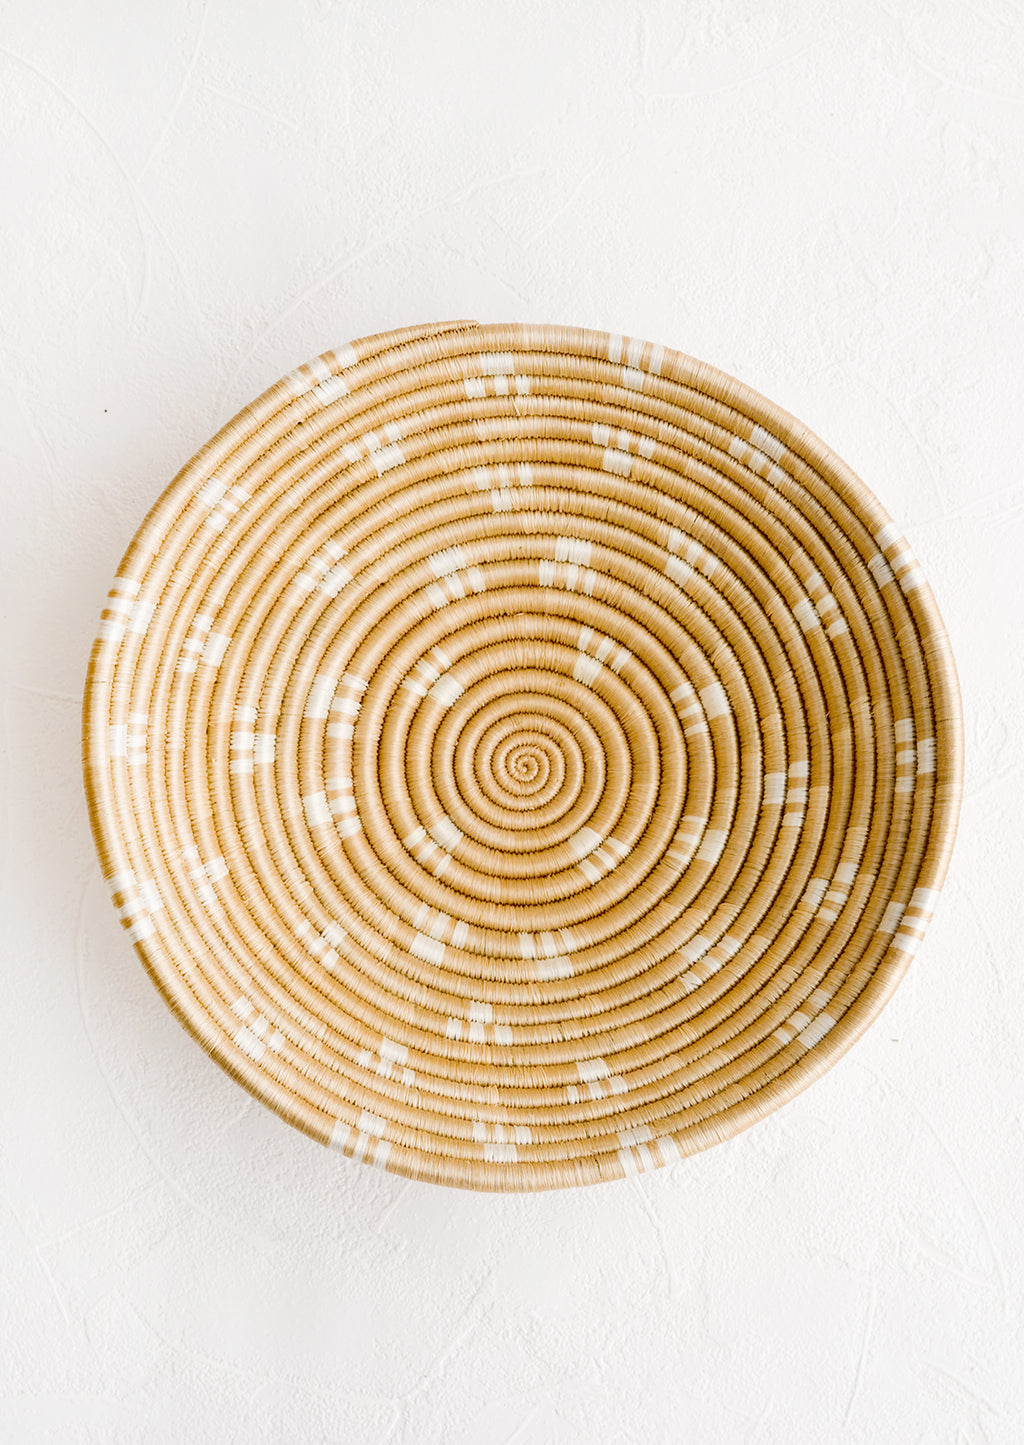 Toasted Almond: A round sweetgrass bowl in tan with white pattern.